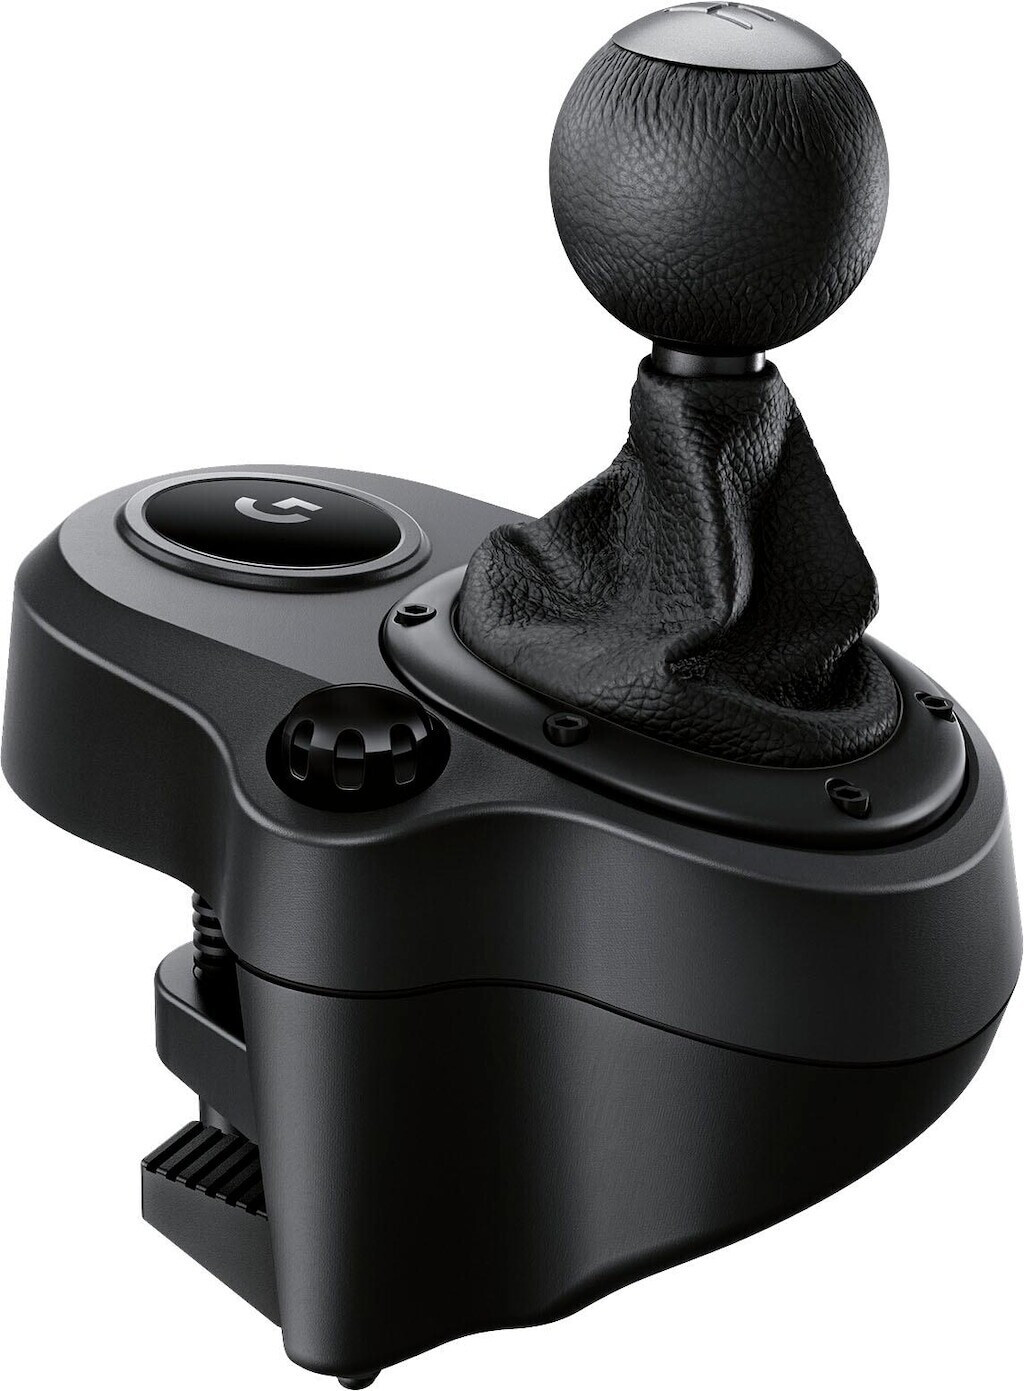 Buy Logitech Driving Force Shifter from £39.49 (Today) – Best 